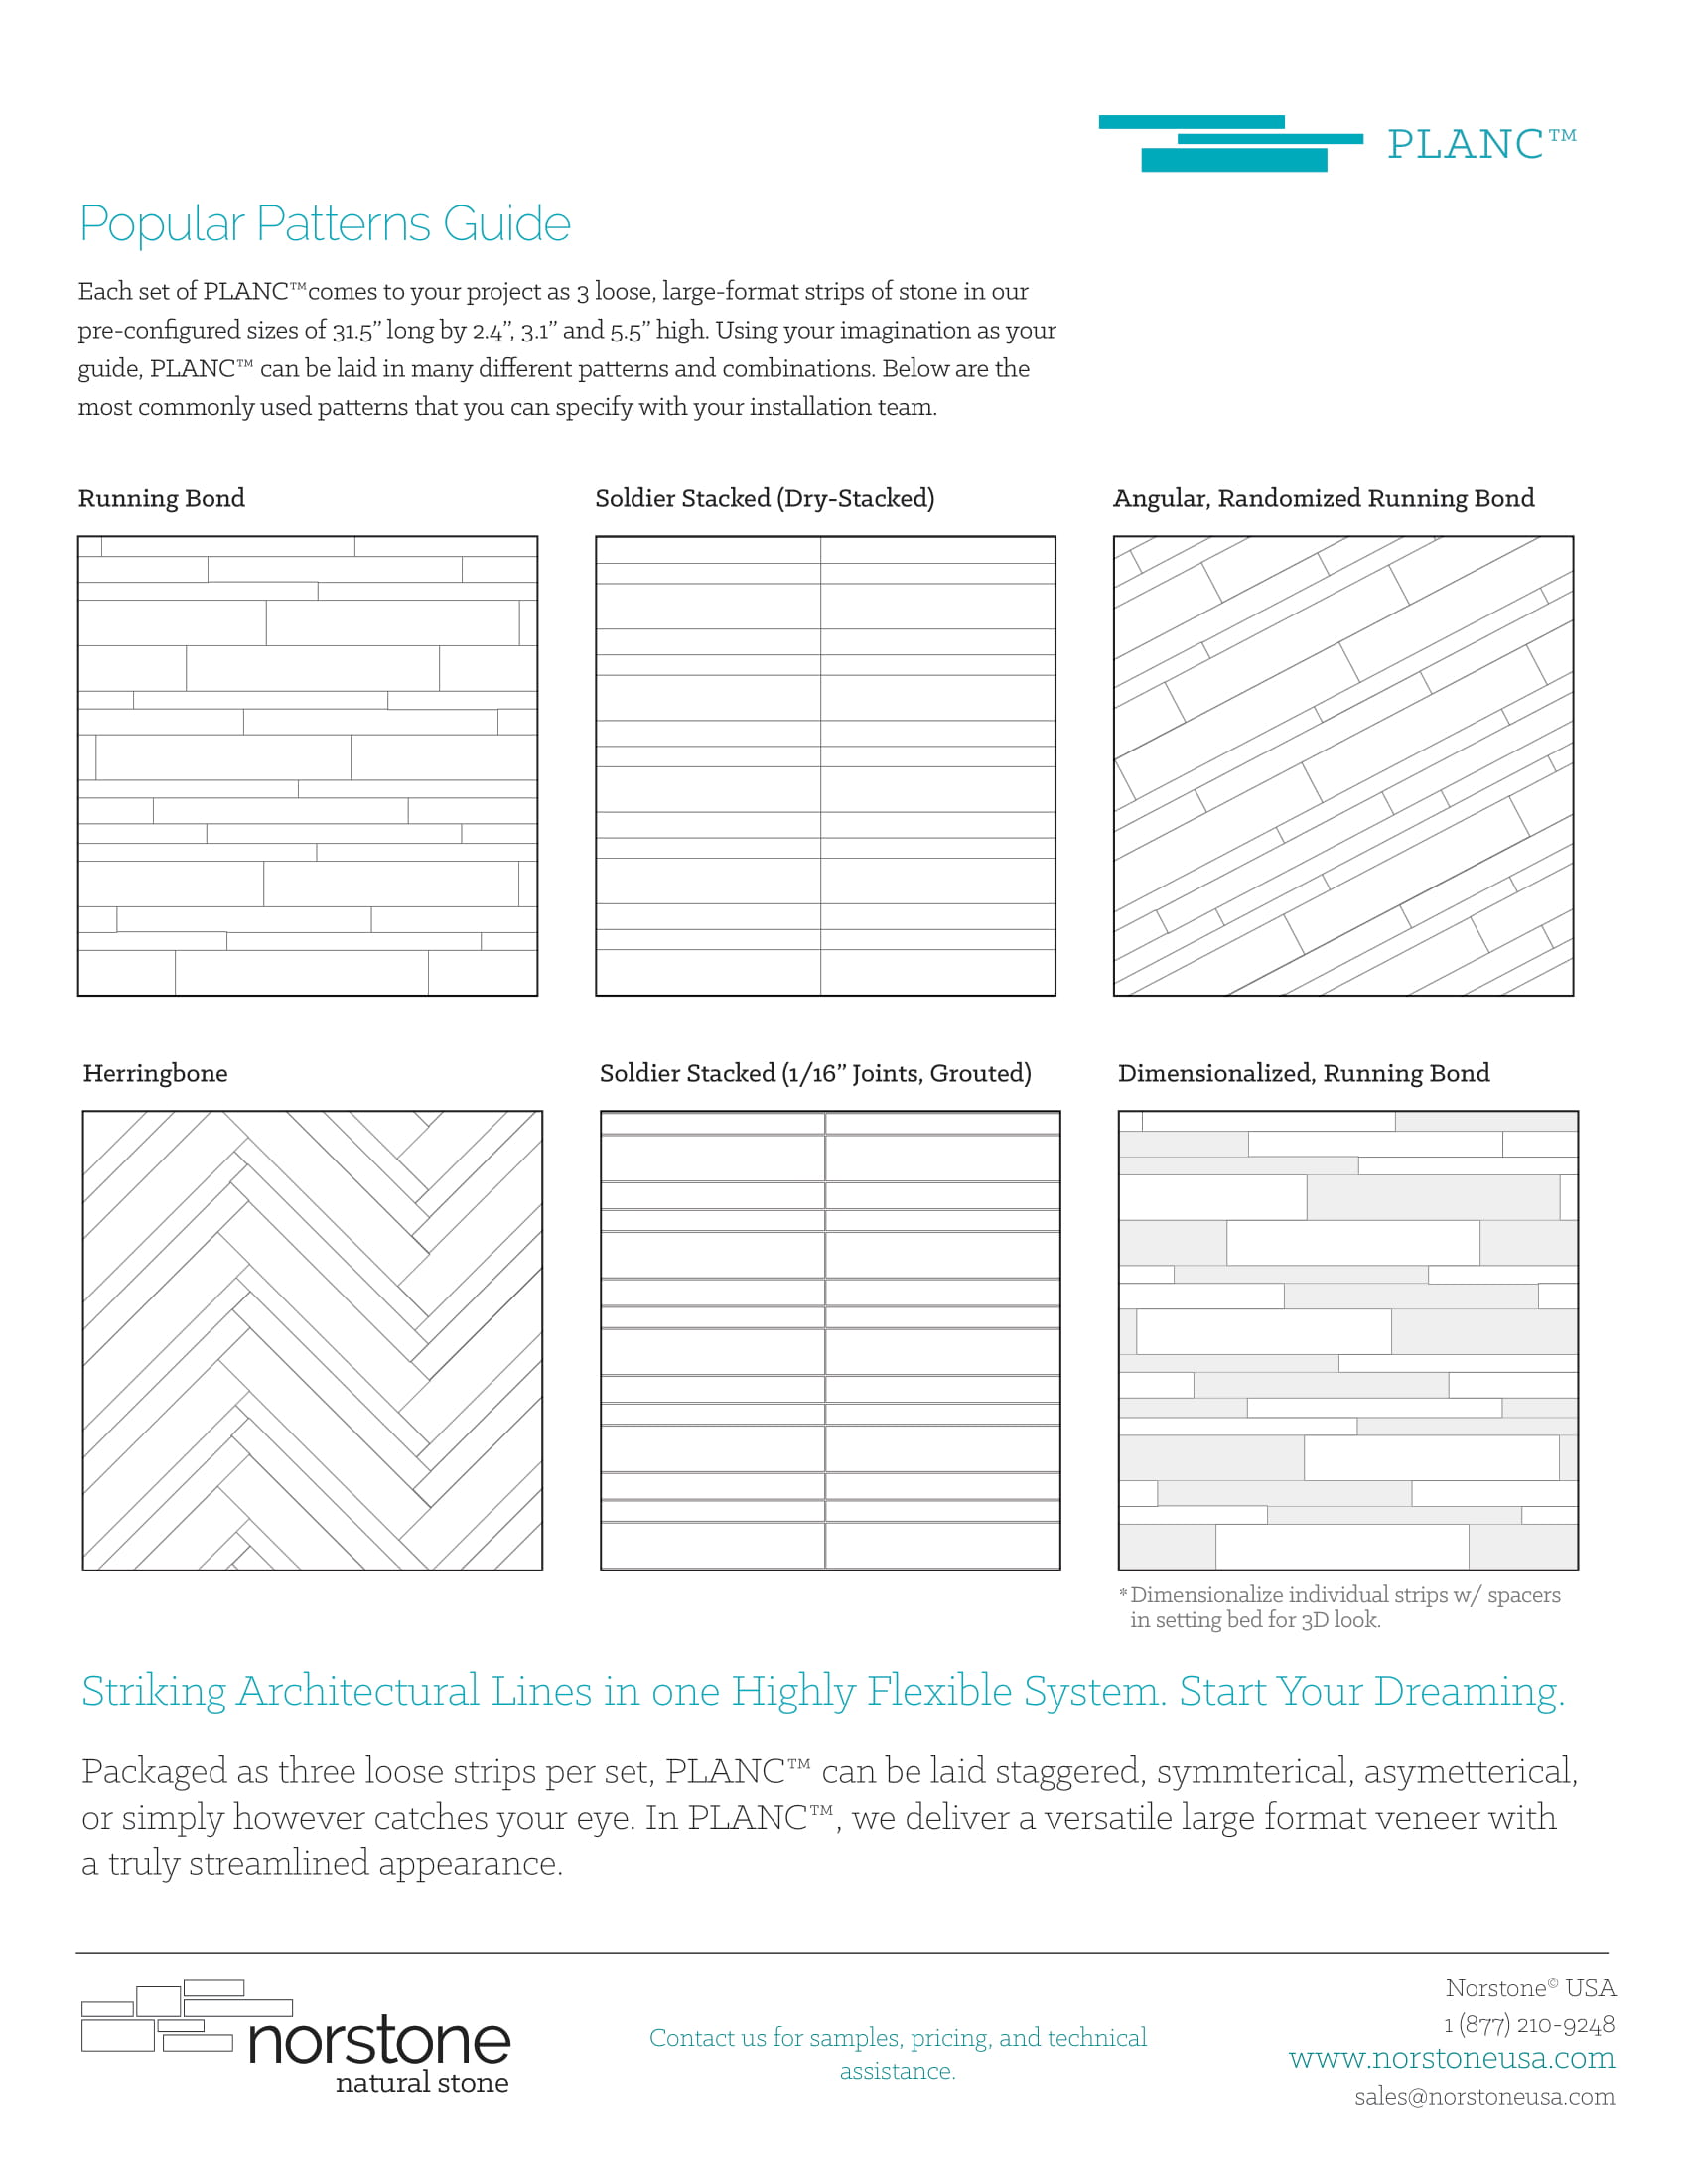 Norstone Planc Large Format Tile Pattern Guide showing 6 popular patterns to install Planc in